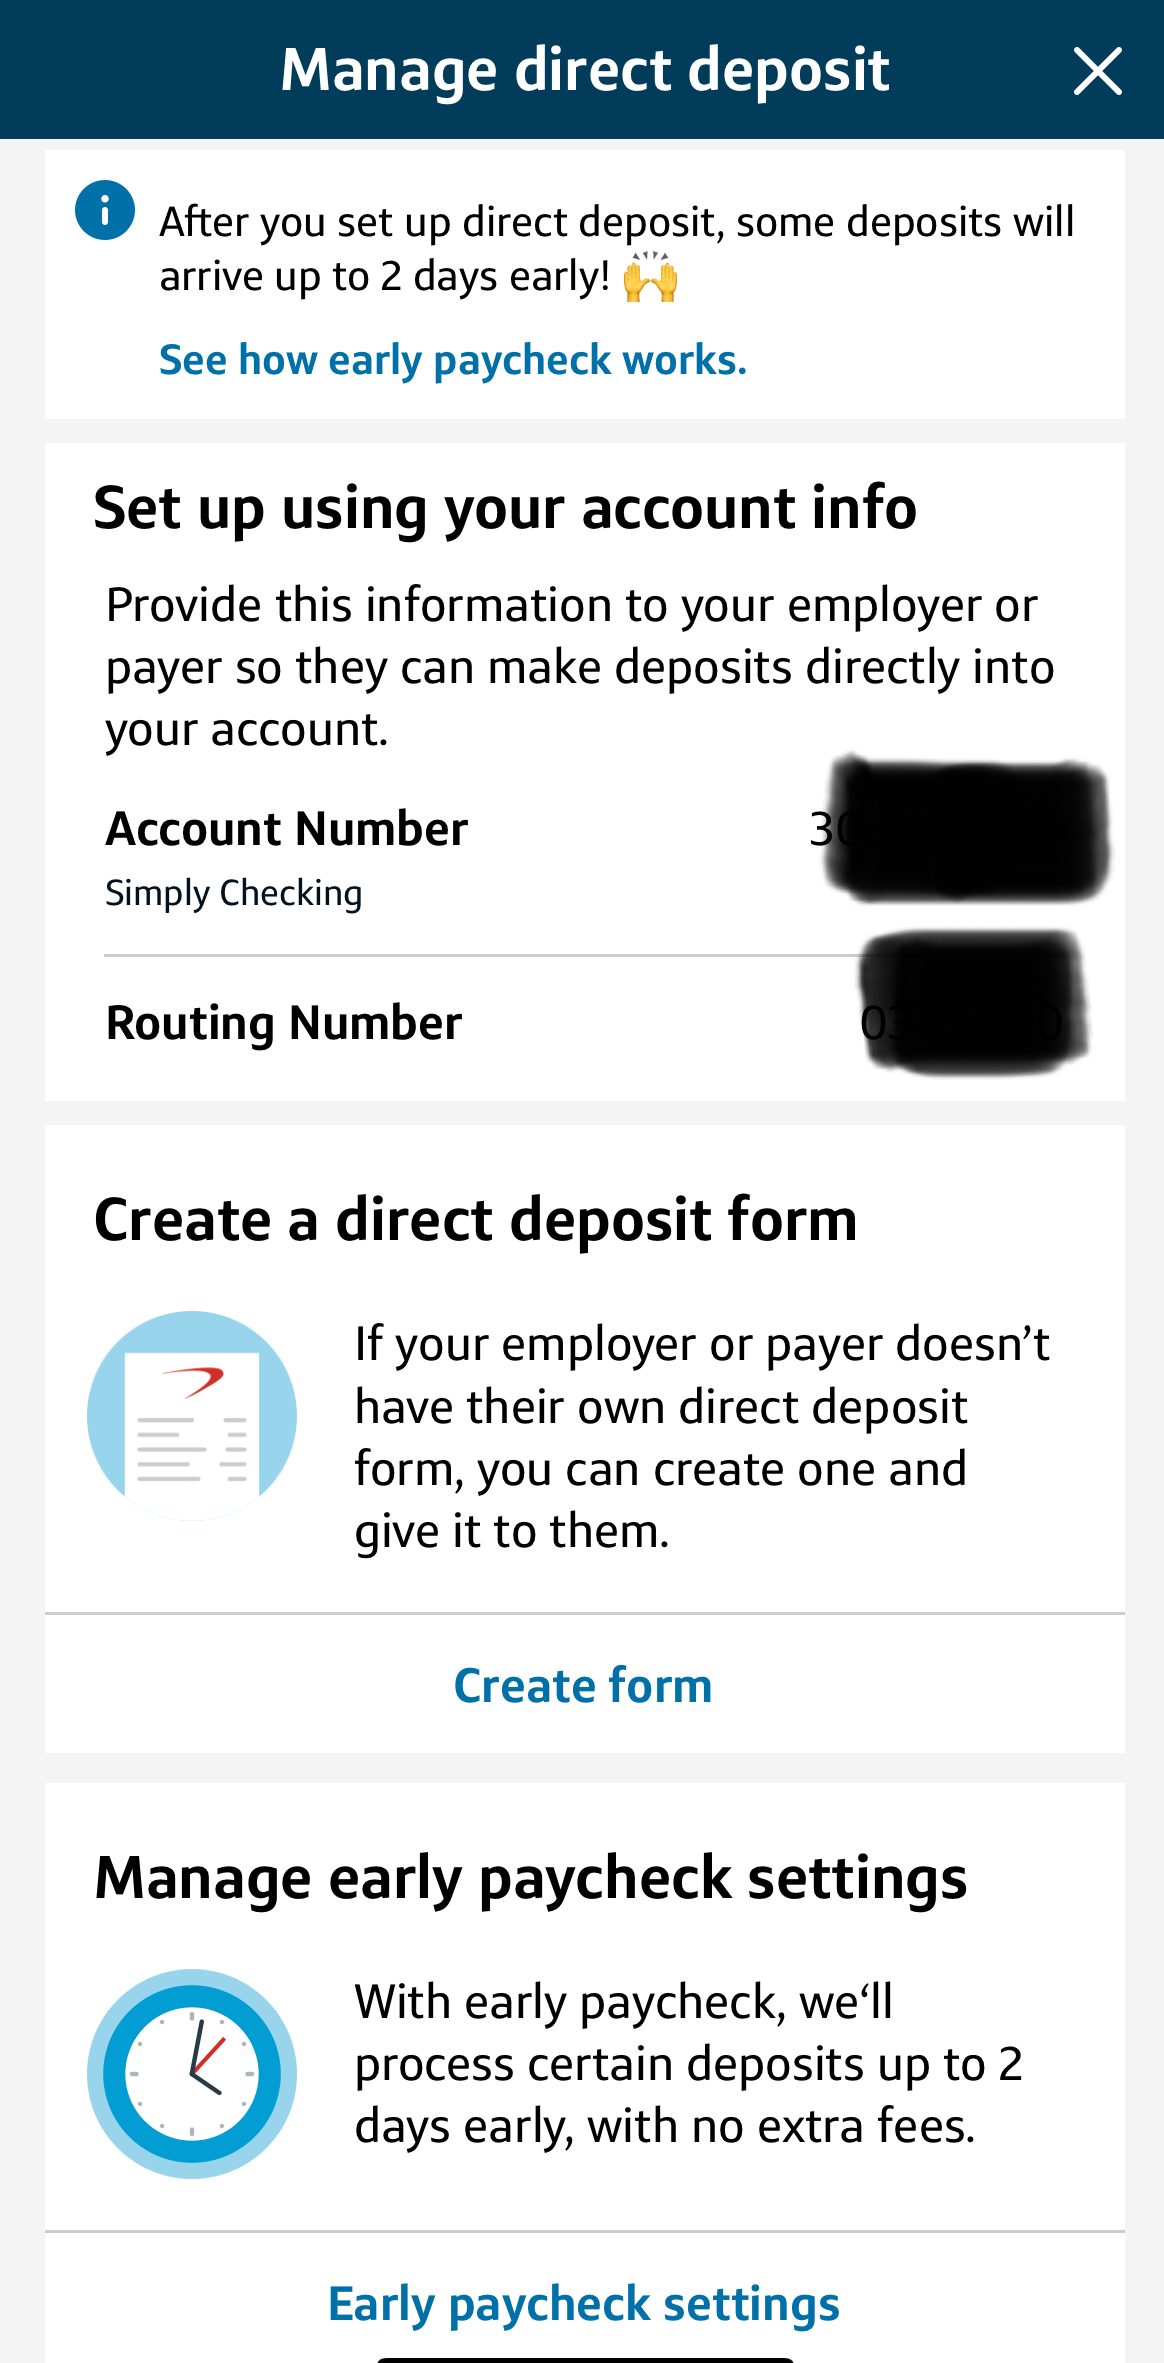 Capital One manage direct deposit